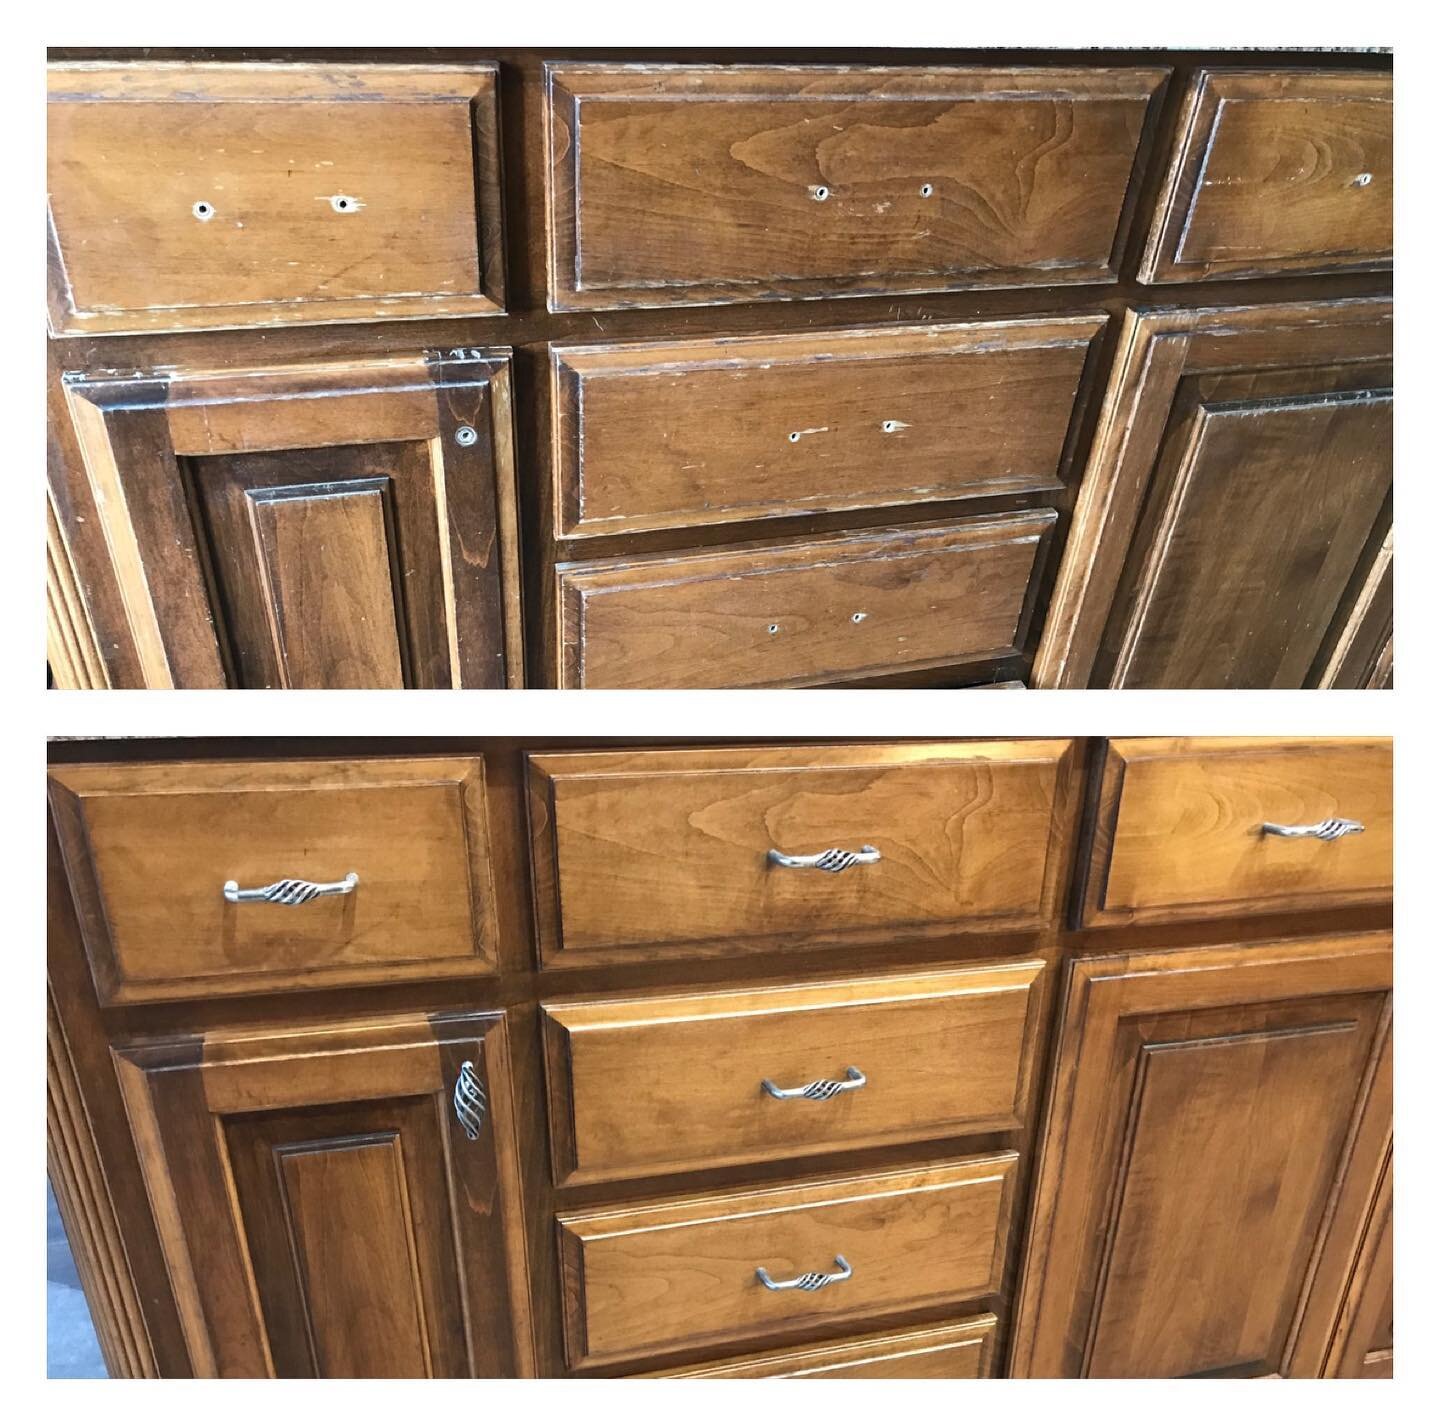 You don&rsquo;t need new cabinets, your woodwork just needs some love! Refinishing your cabinets can boost the value of your home at a fraction of the cost of traditional refinishing. Contact us today to set up a free estimate!

#homedecor #woodrefin